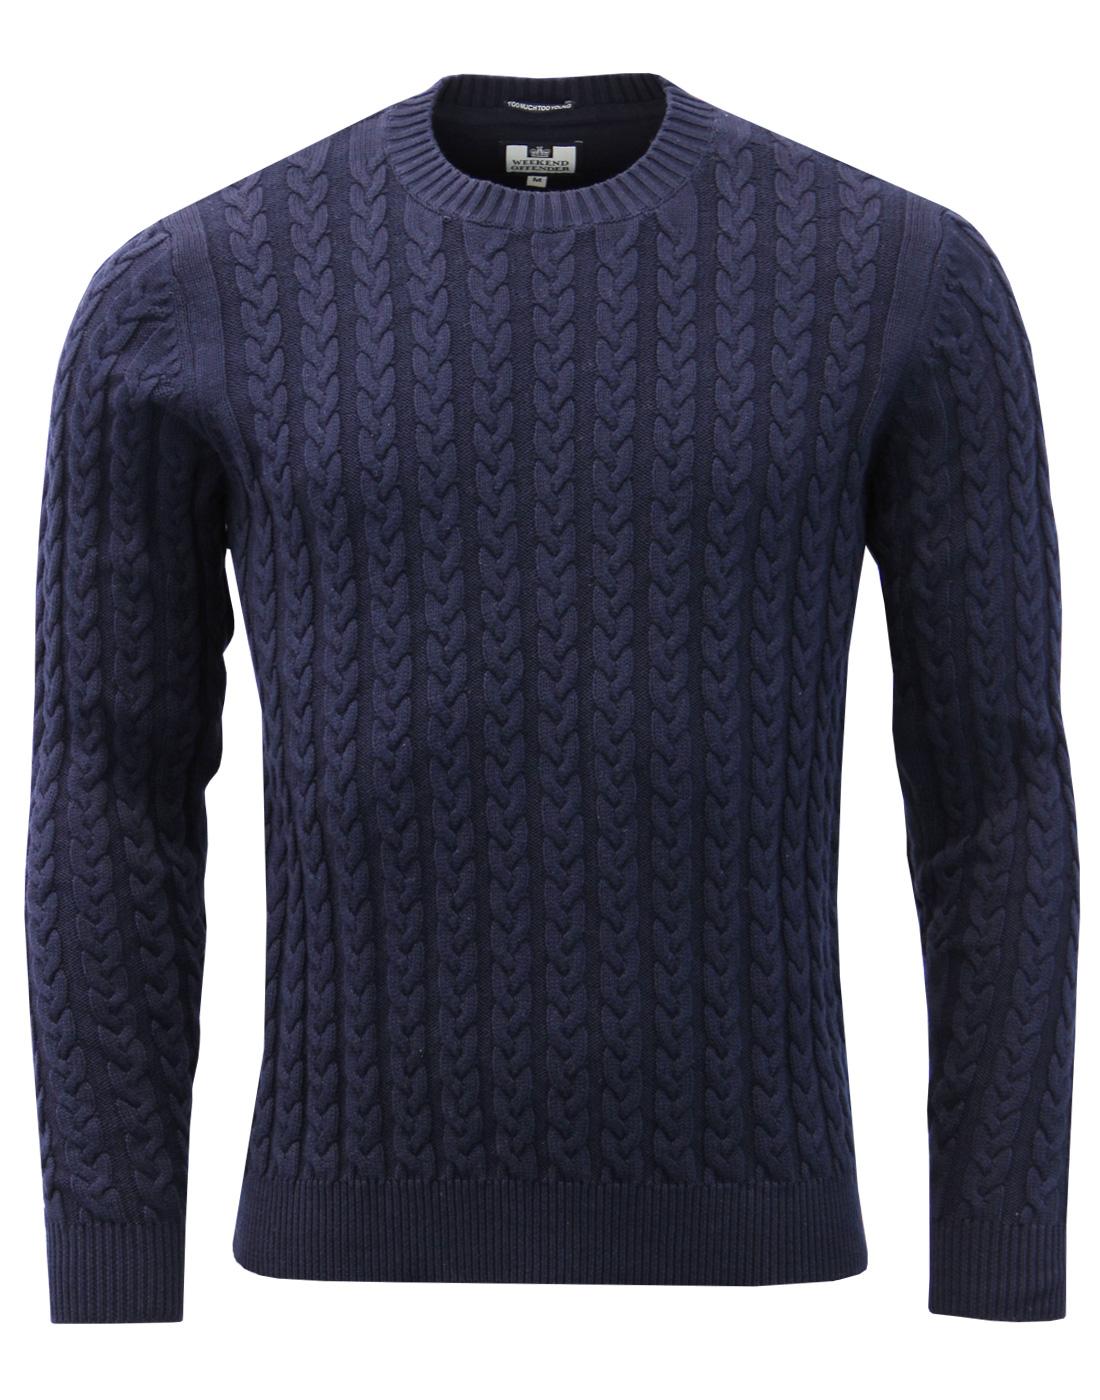 WEEKEND OFFENDER Woods Men's Retro 70s Cable Knit Jumper in Navy